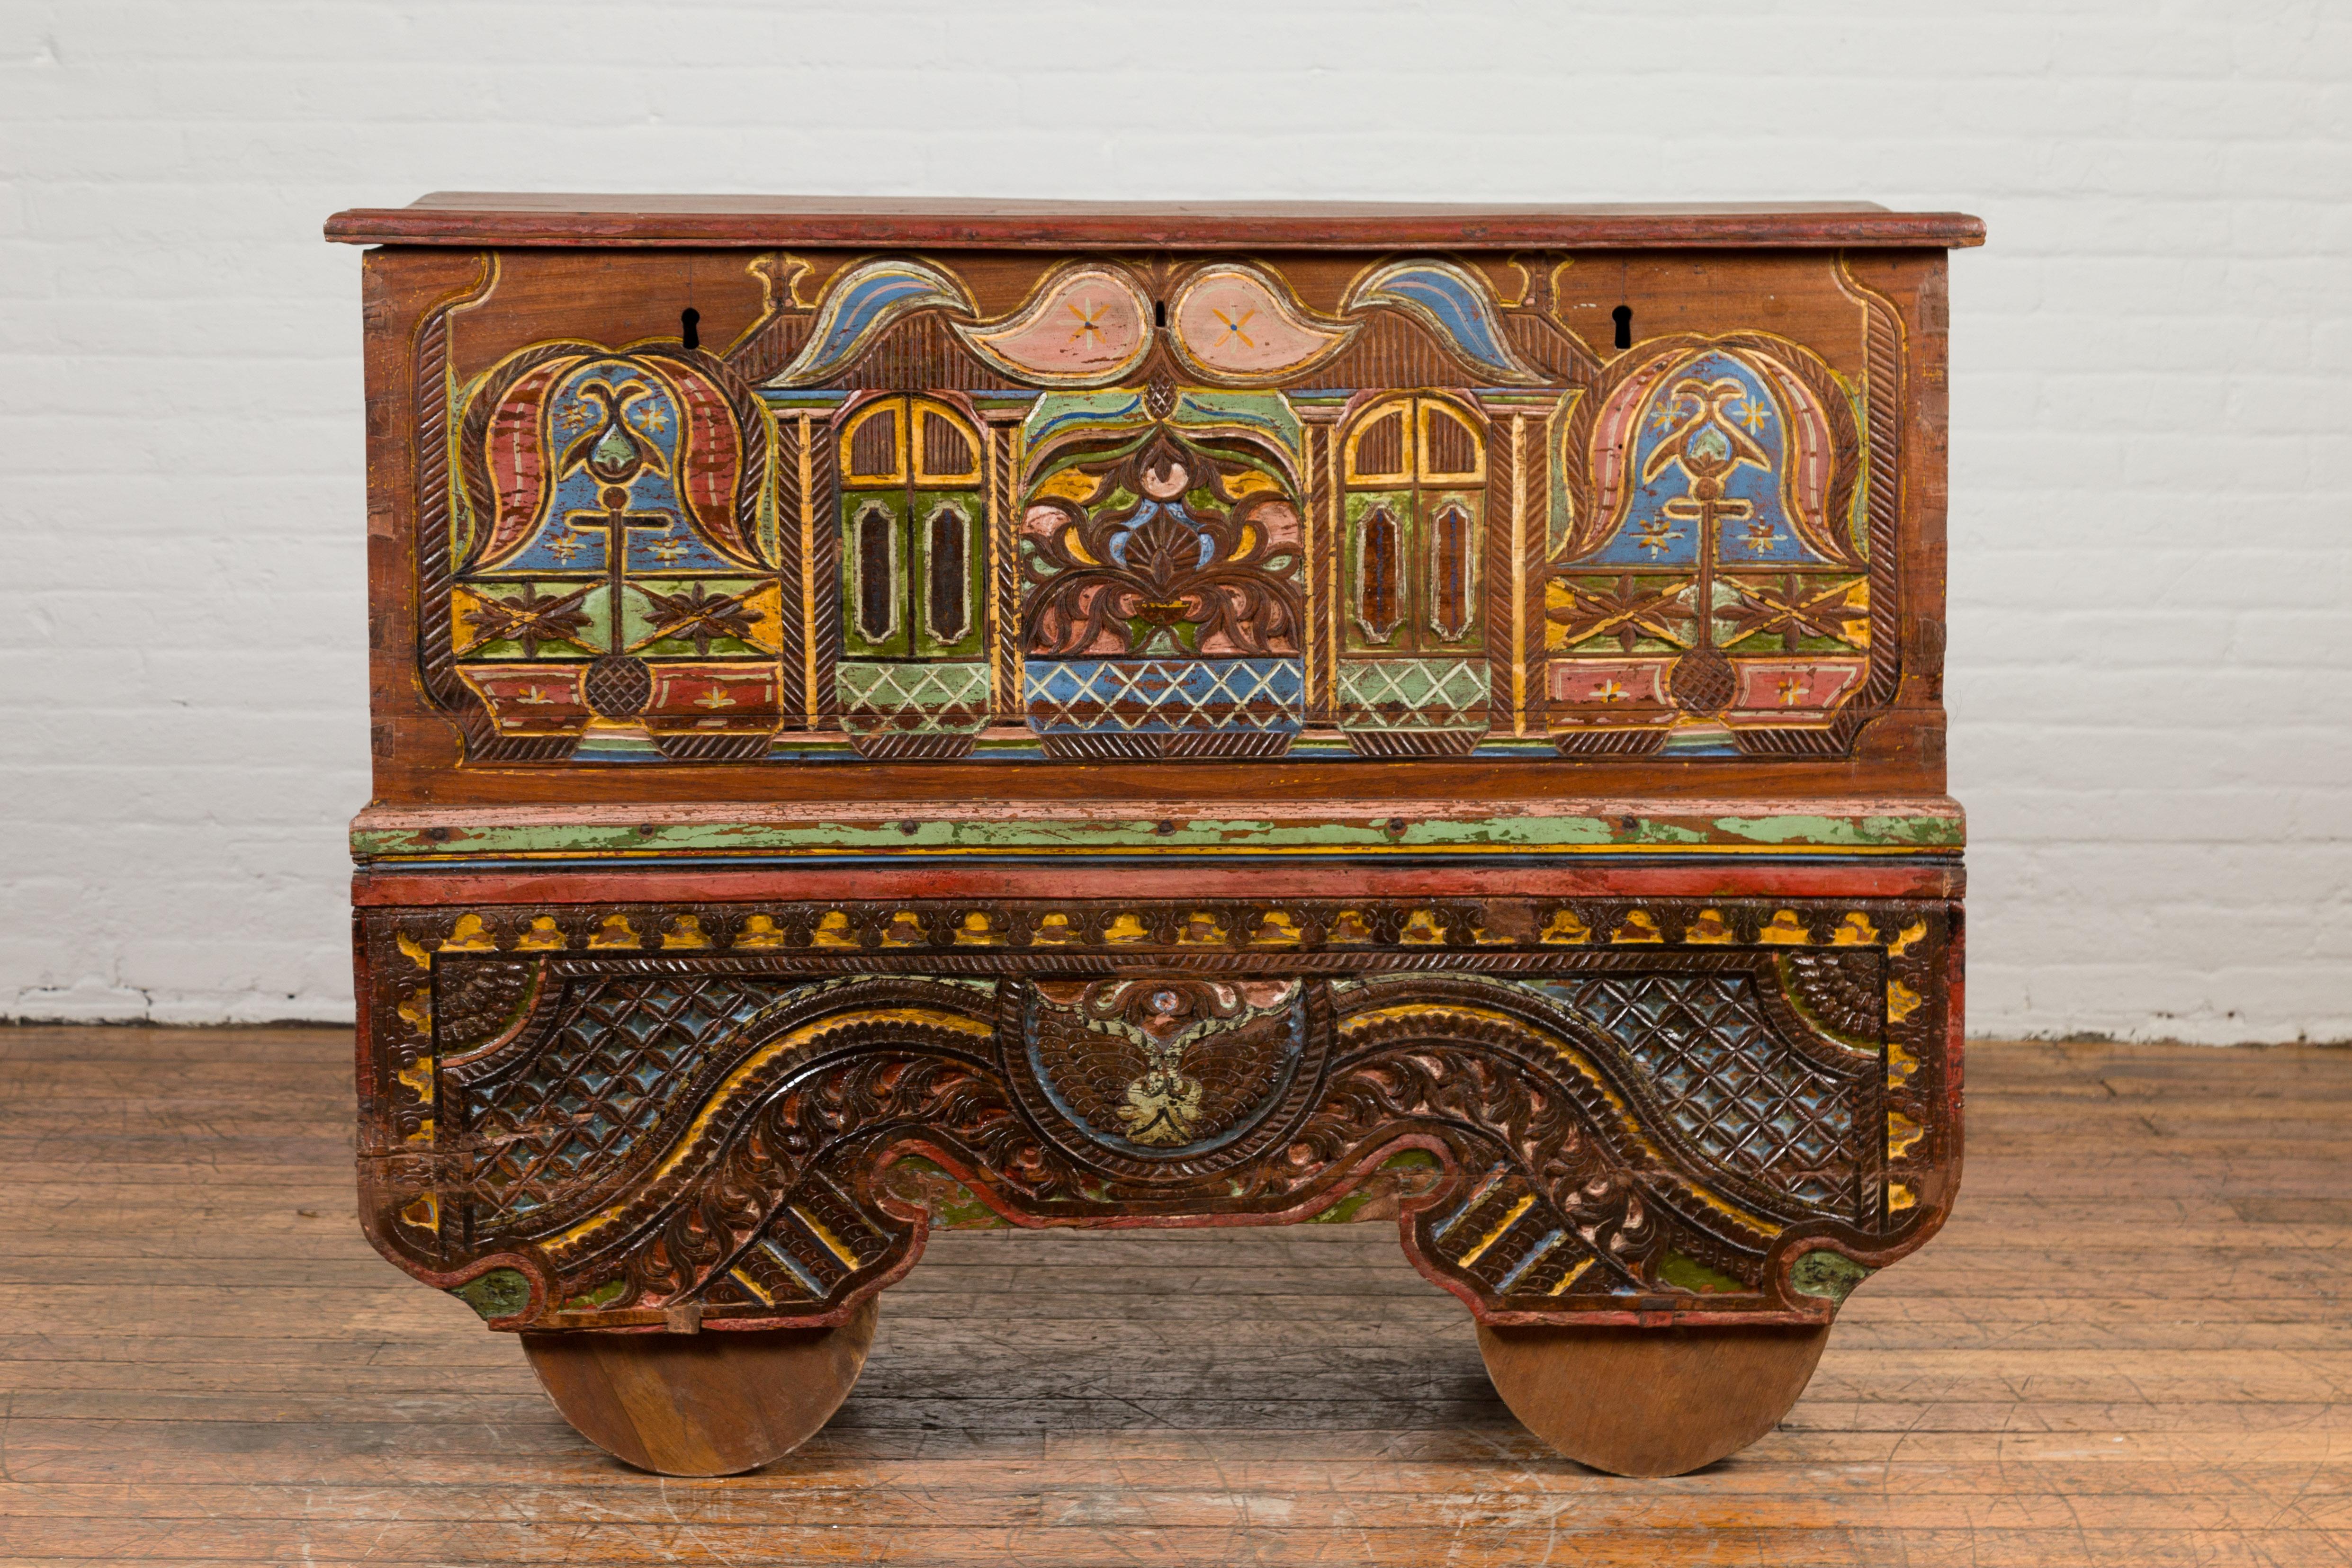 An Indonesian 19th century merchant's blanket chest on wheels from Madura, with hand-painted and carved front showcasing tribal designs. Created in Madura off of the northeastern coast of Java during the 19th century, this merchant's chest draws our